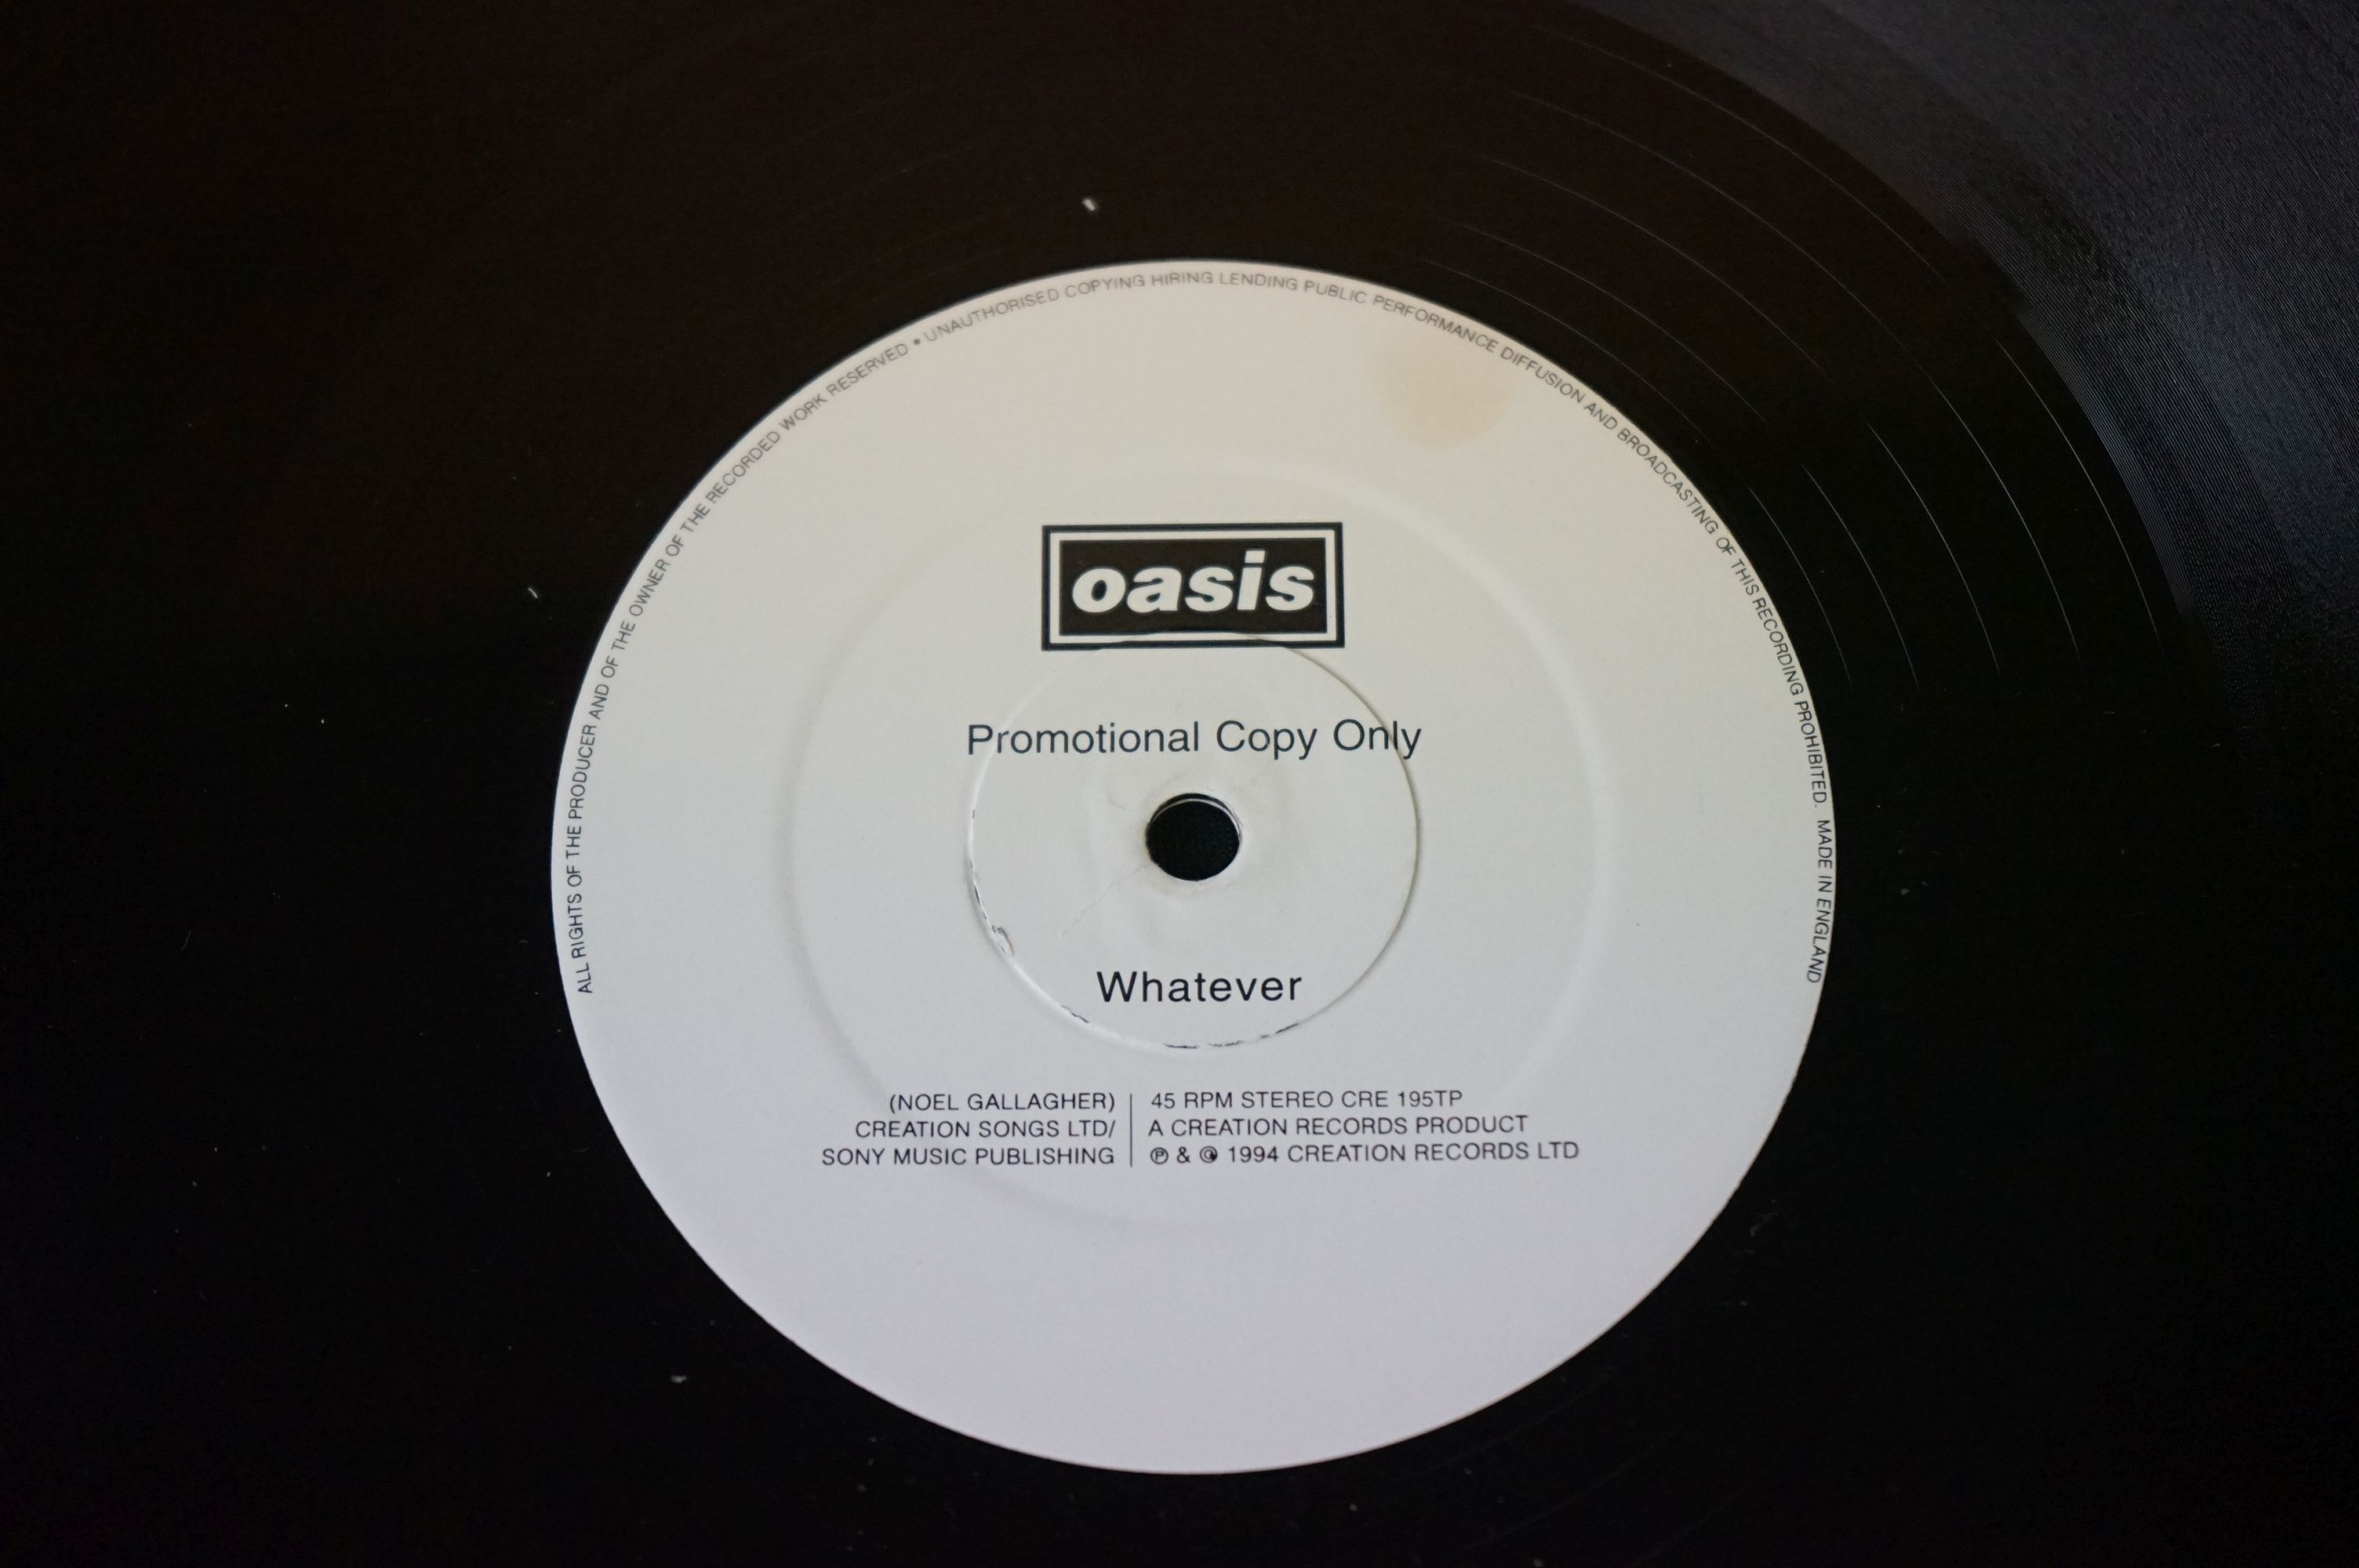 Vinyl - Oasis Whatever UK Original UK 1994 1st pressing, Promo Only one sided 12? (Creation Records, - Image 3 of 4